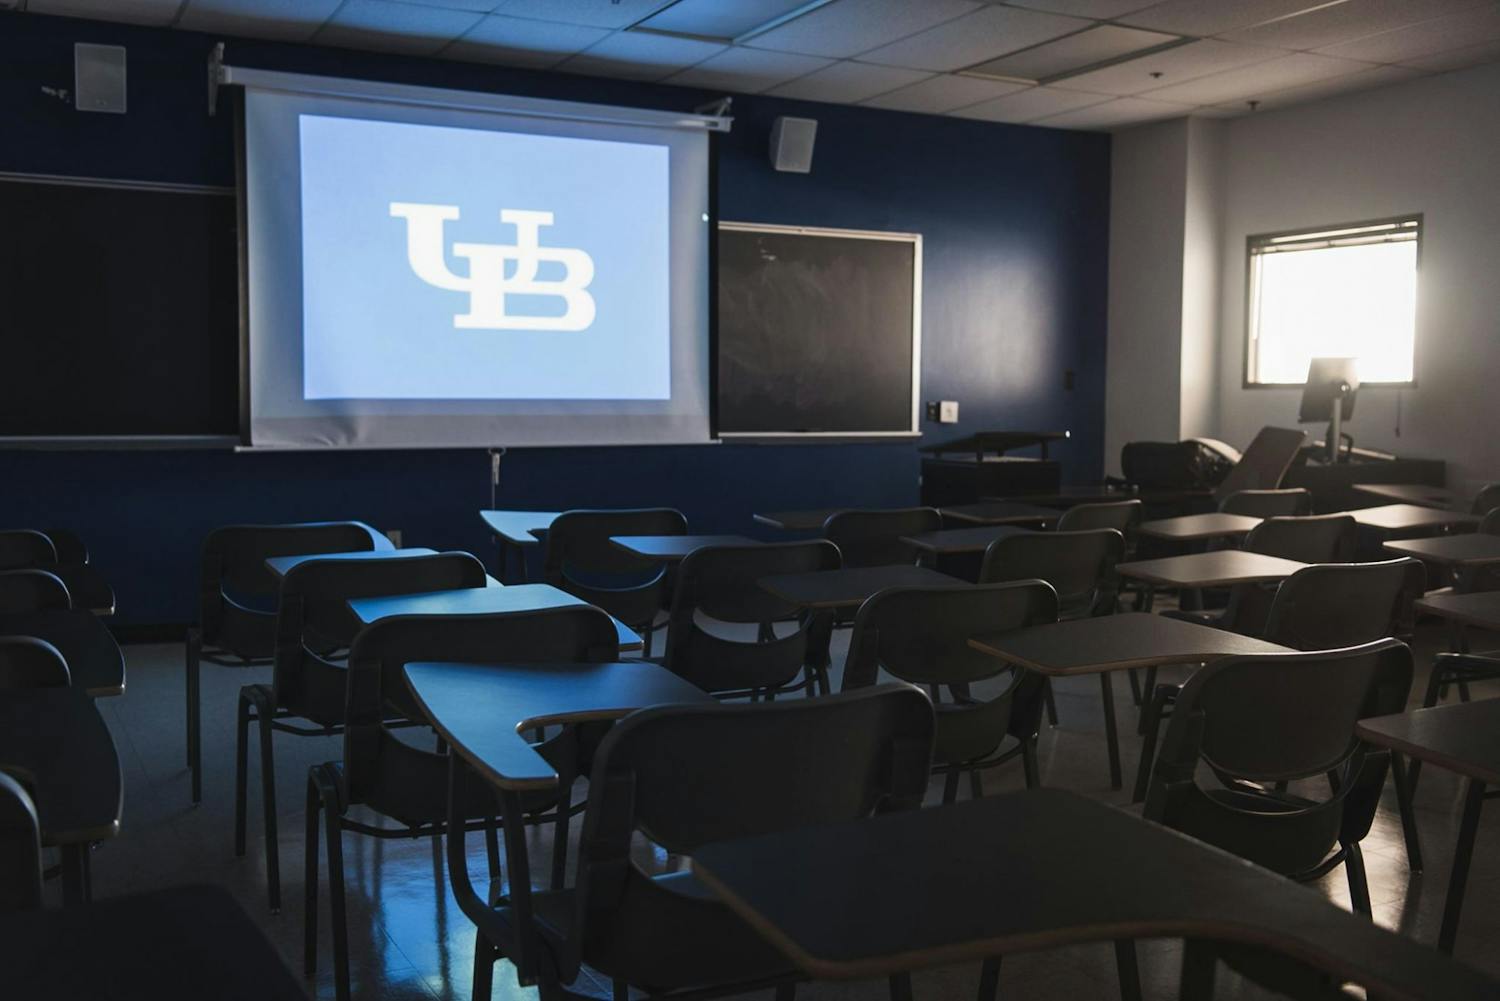 A survey conducted by UB in March shows 56% of students are "very uncomfortable" or "somewhat uncomfortable" with completing their schoolwork online. Many UB students are struggling with distance learning due to financial burdens, lack of on-campus resources or having sick family members.&nbsp;